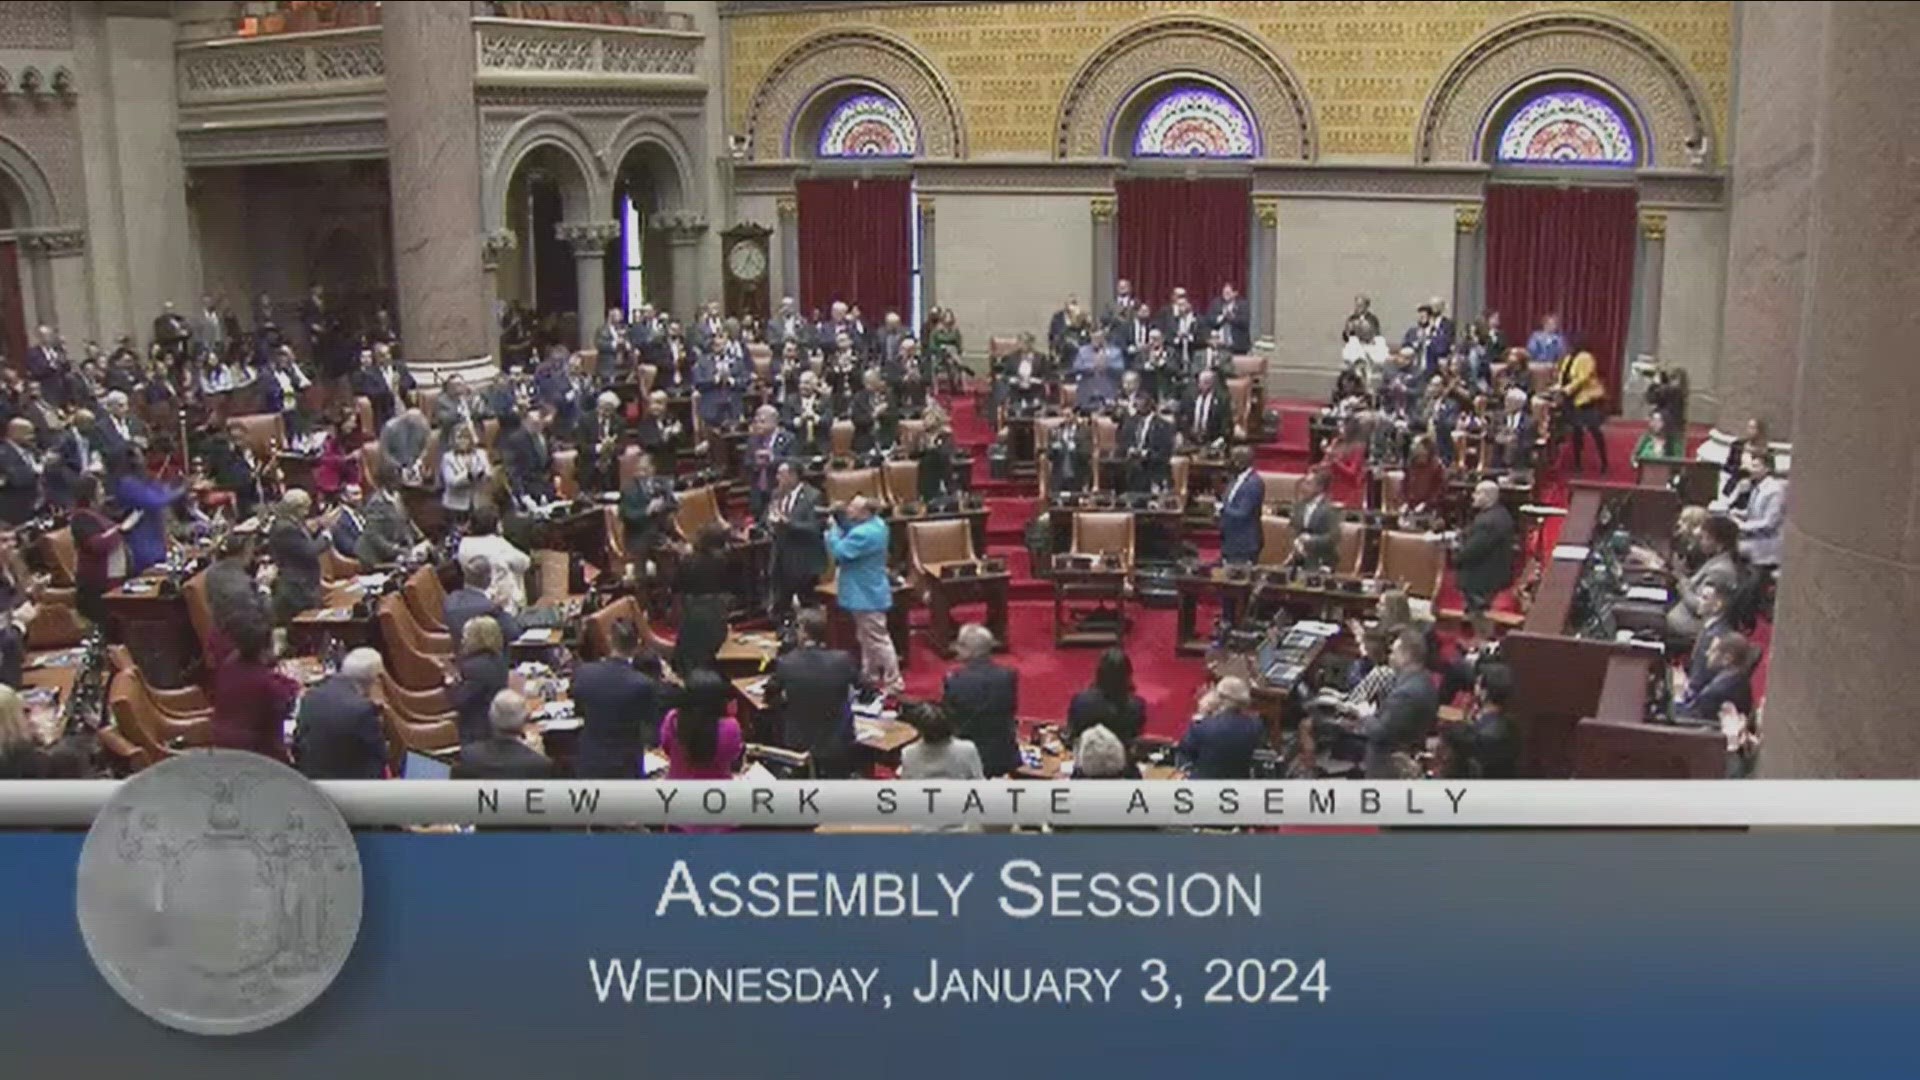 TONIGHT, LAWMAKERS ARE BACK IN ALBANY FOR THE FIRST SESSION OF THE YEAR... FOR THE NEW YORK STATE ASSEMBLY AND STATE SENATE